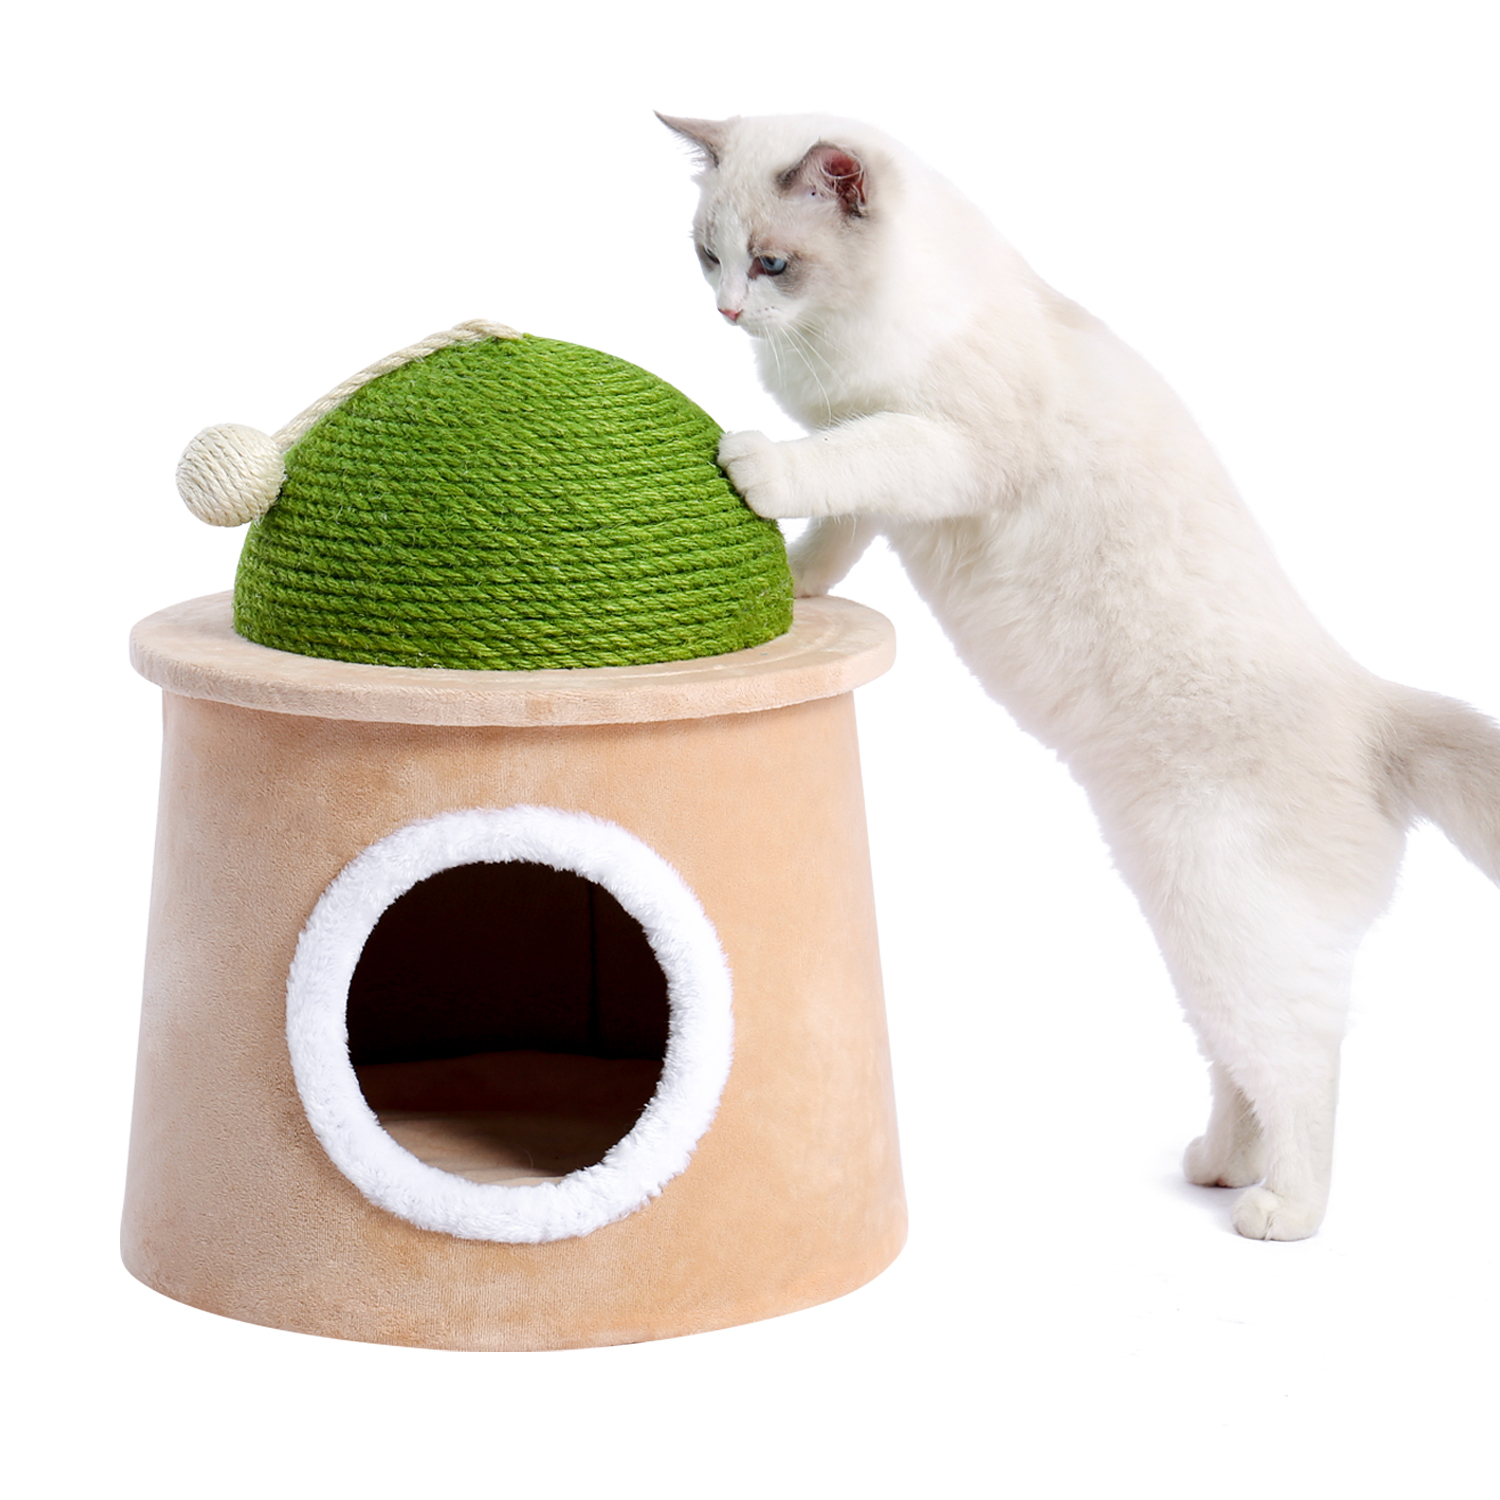 Cactus Cat Cave House with Sisal Scratching Post and sisal ball for cat kittens Green M-Boyel Living